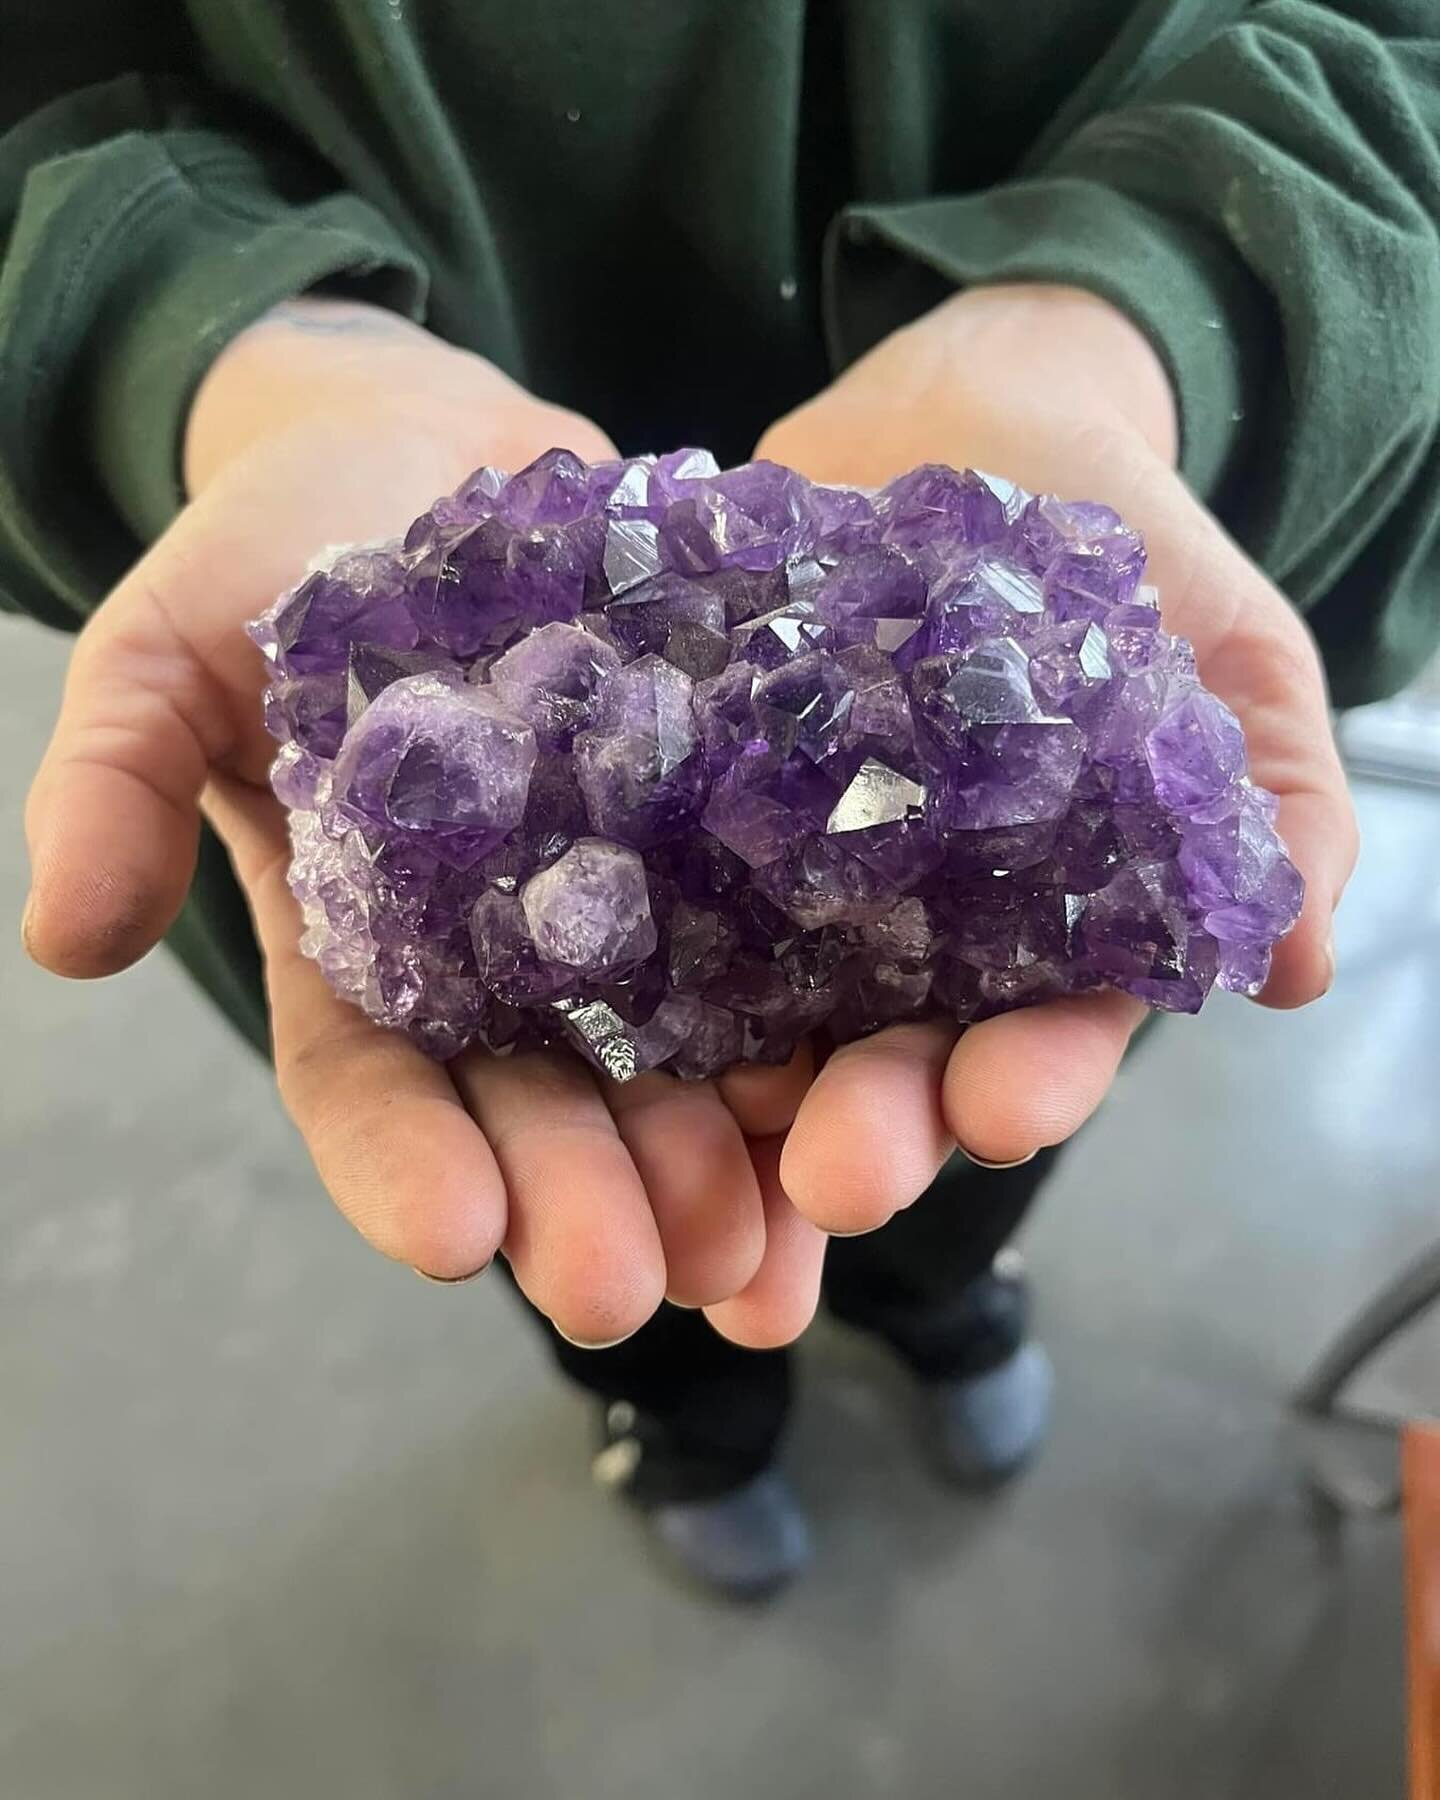 Stop on in to Frank Otte Nursery &amp; Garden Center in Middletown and check out our magic crystals from Energetically In Harmony!! 

Crystal of the week: Amethyst 

Amethyst is Known as &ldquo;the all purpose stone&rdquo;, Amethyst is a protective s